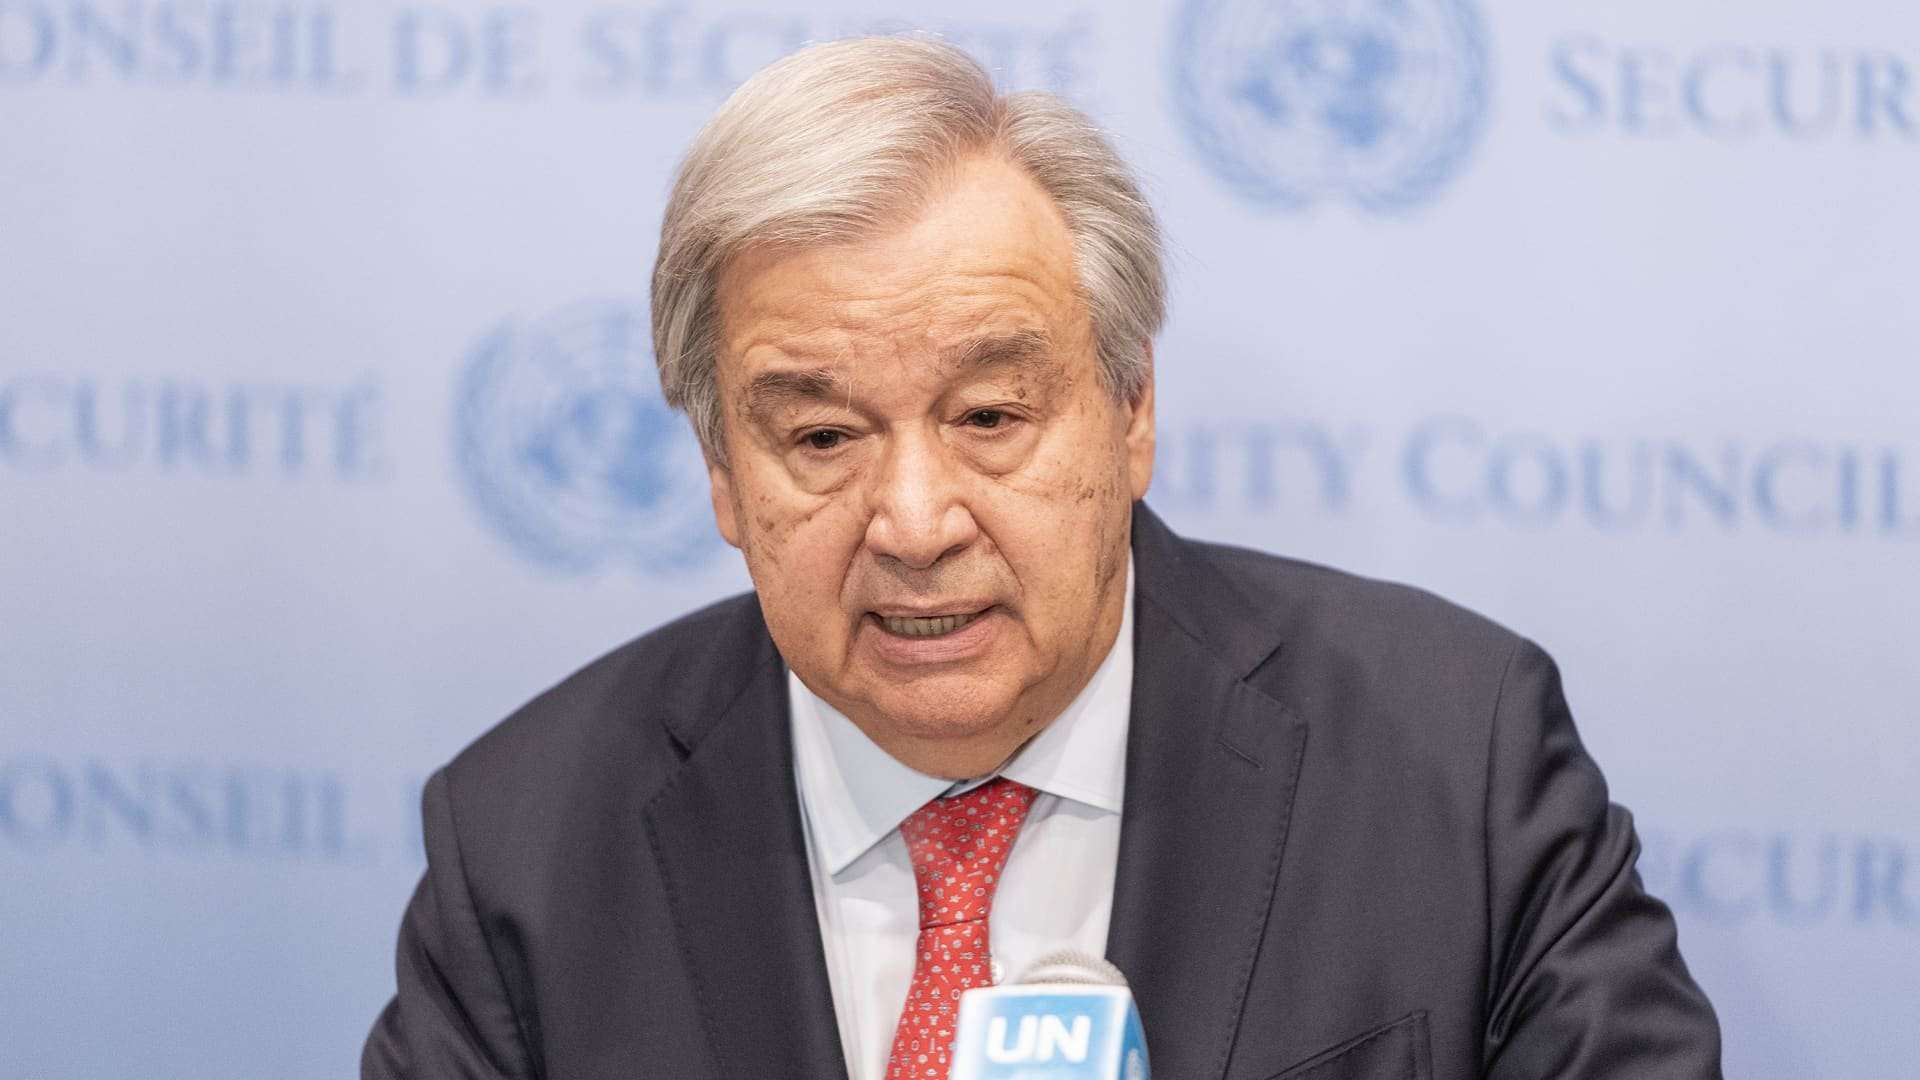 image for U.N. chief calls for an end to $7 trillion in fossil fuel subsidies